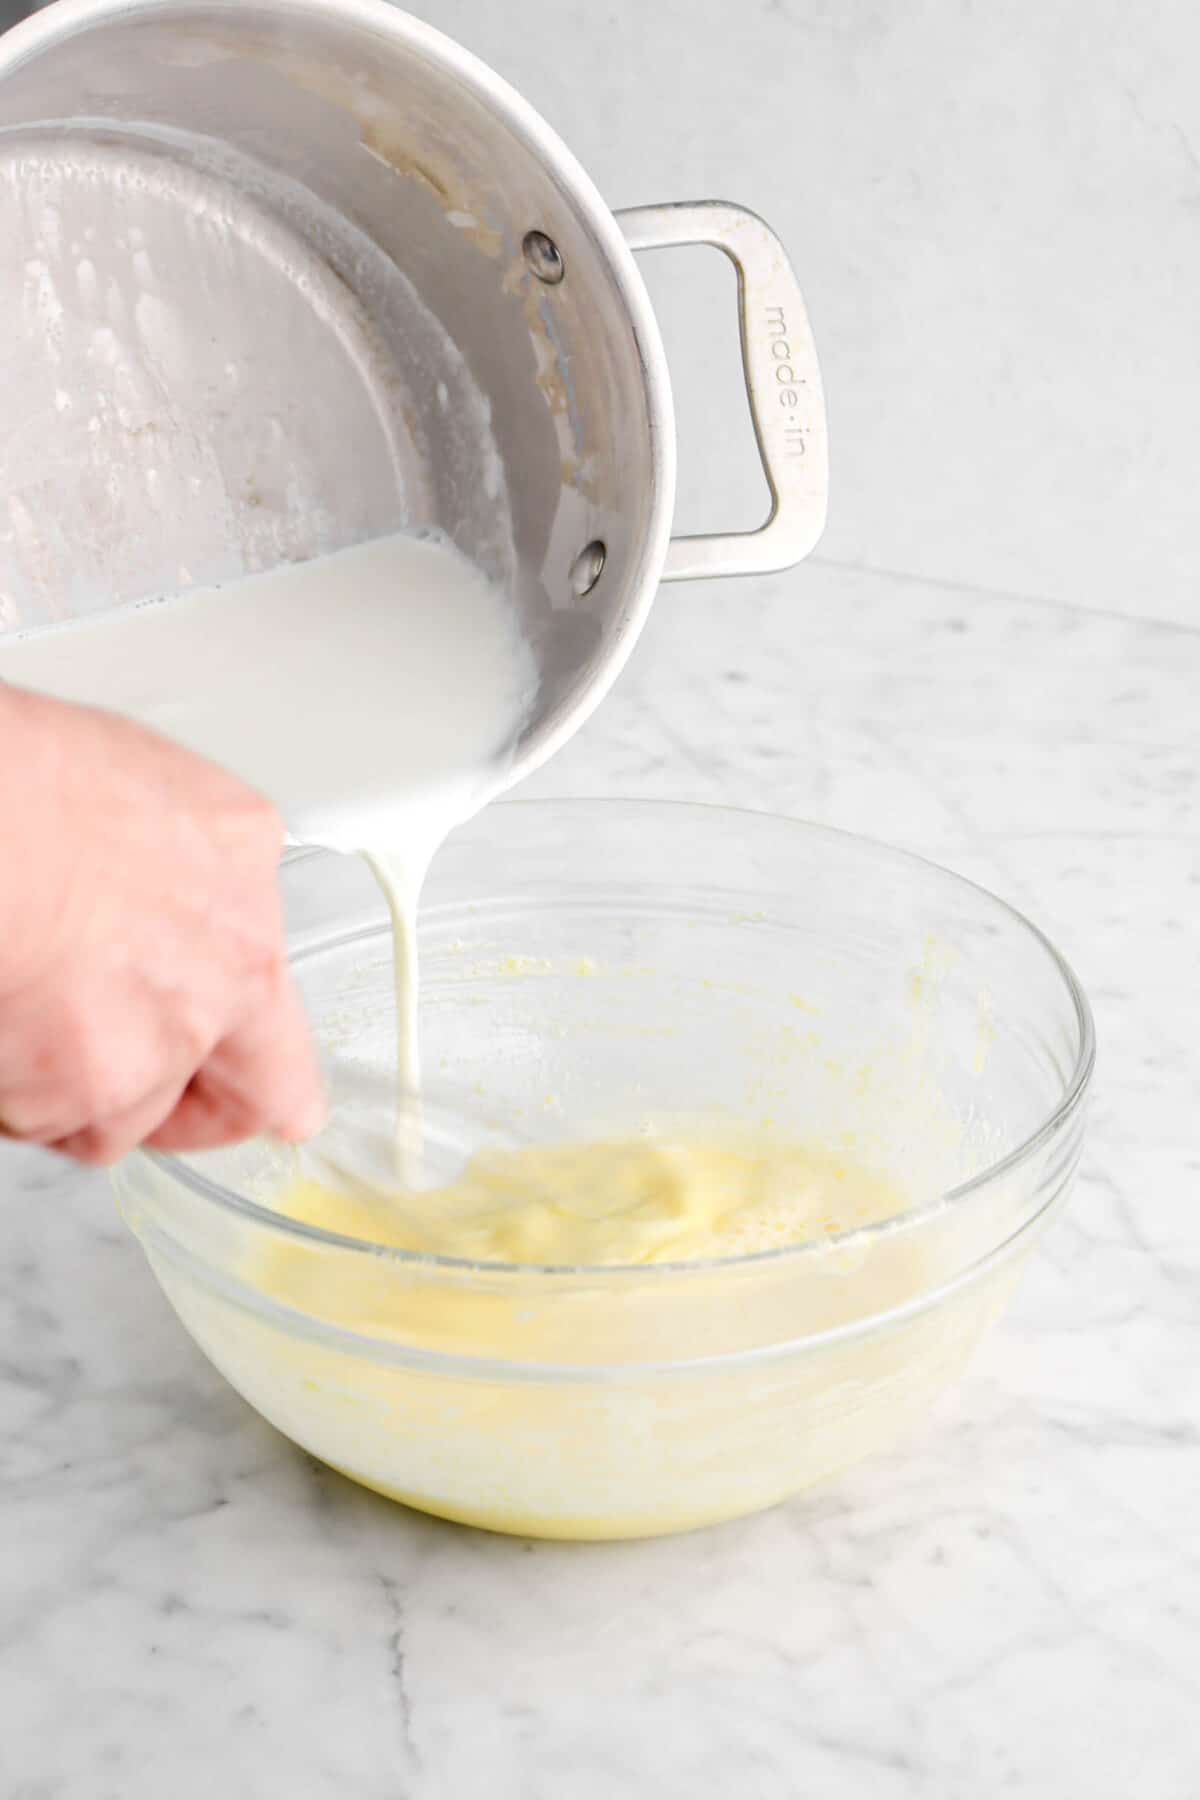 heated cream being poured into egg yolk mixture